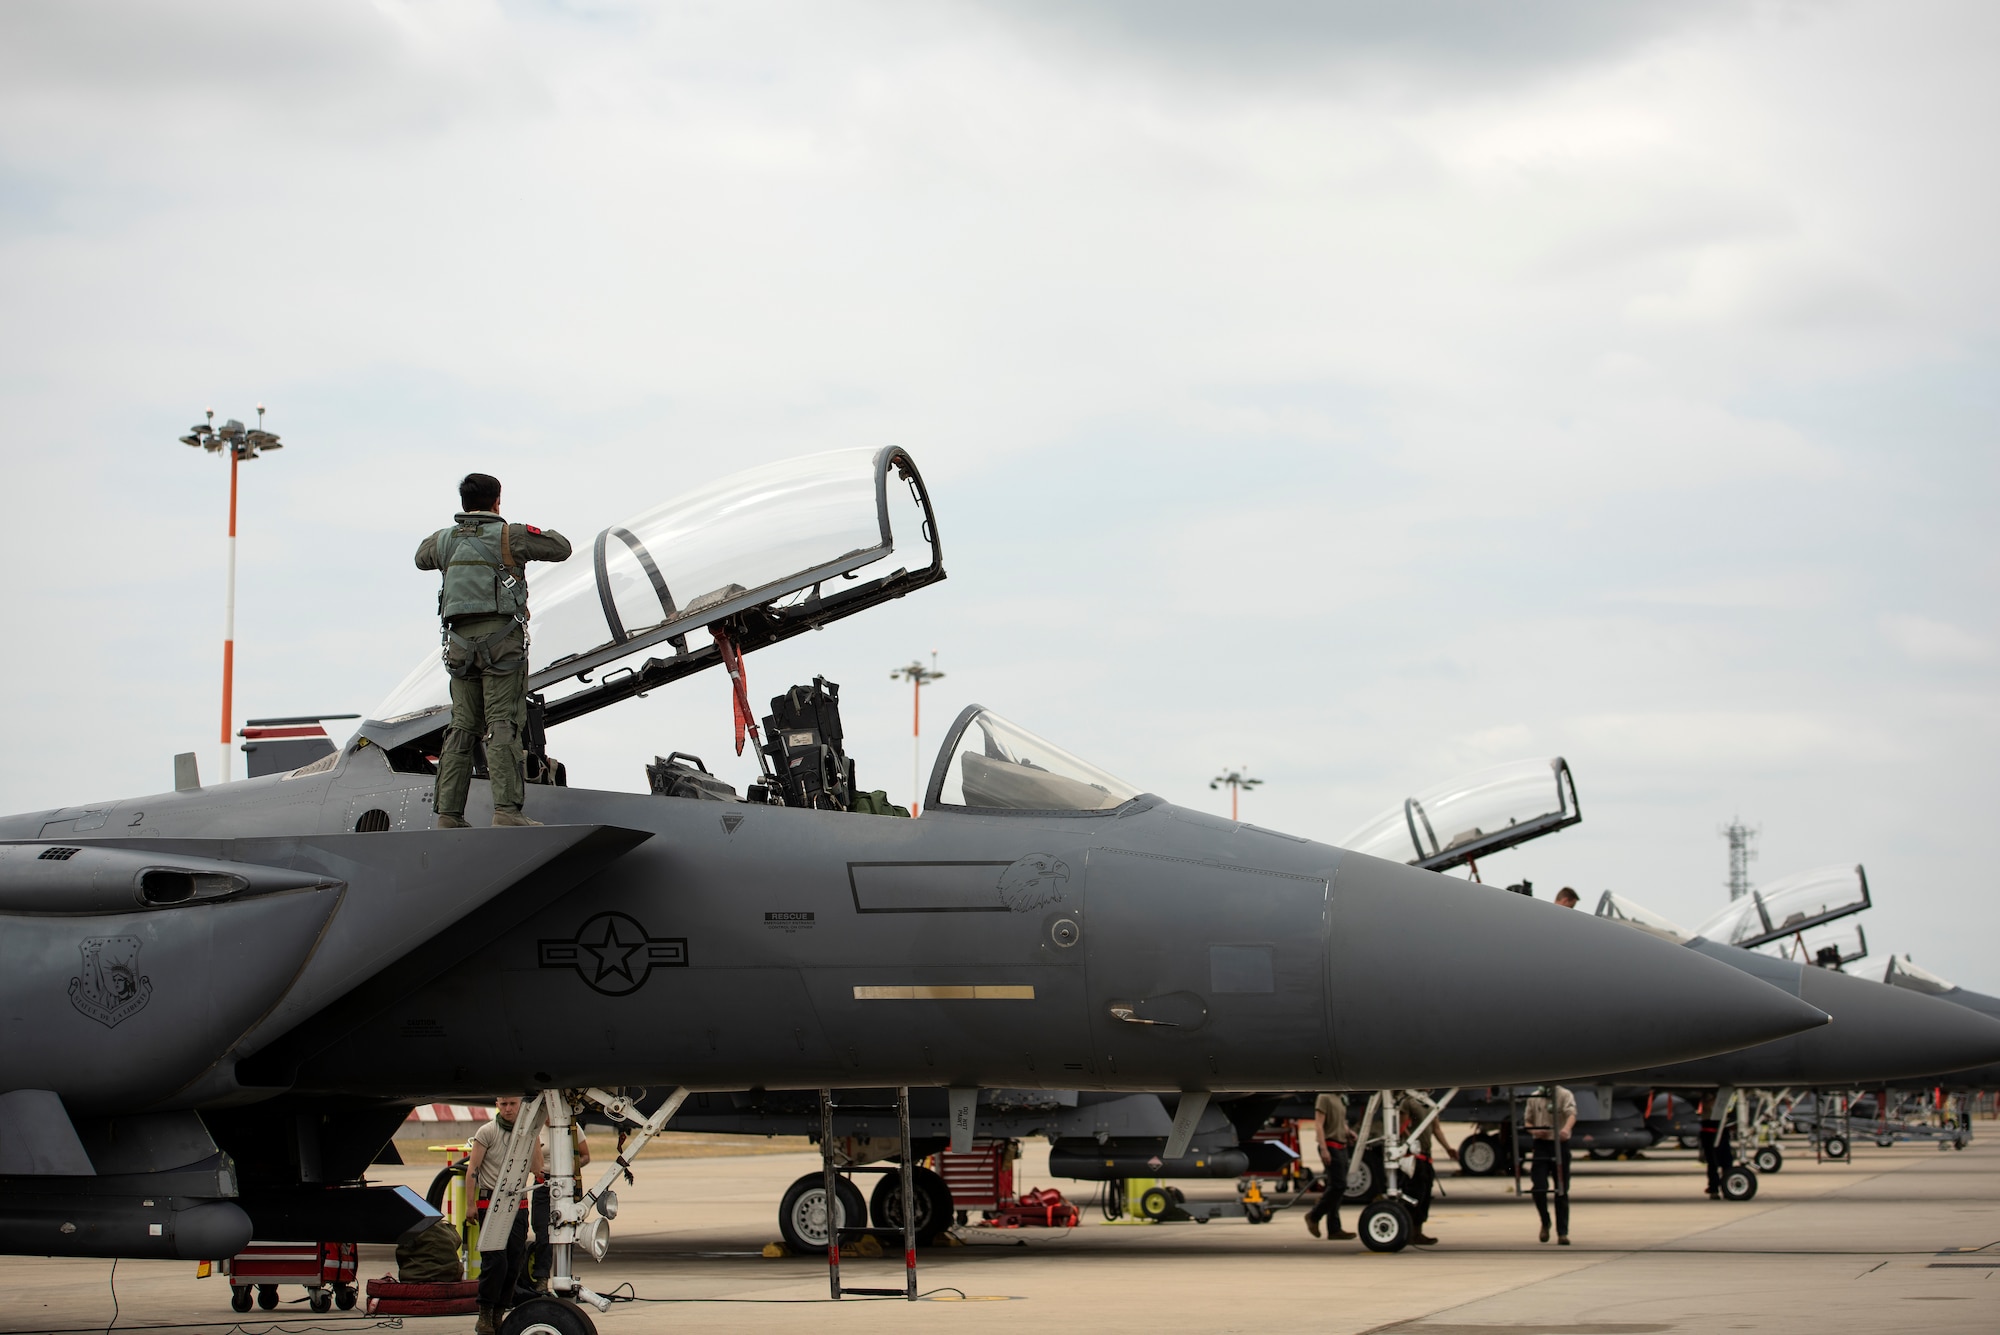 48th Fighter Wing aircrew and Airmen prepare F-15E Strike Eagles prior to takeoffs at Royal Air Force Lakenheath, England, May 27, 2020. U.S. Air Force F-15s assigned to the 48th Fighter Wing, F-16s assigned to the 31st Fighter Wing and 52nd Fighter Wing, and KC-135s assigned to the 100th Air Refueling Wing participated in a large force exercise within the U.K. North Sea airspace. (U.S. Air Force photo by Airman 1st Class Jessi Monte)